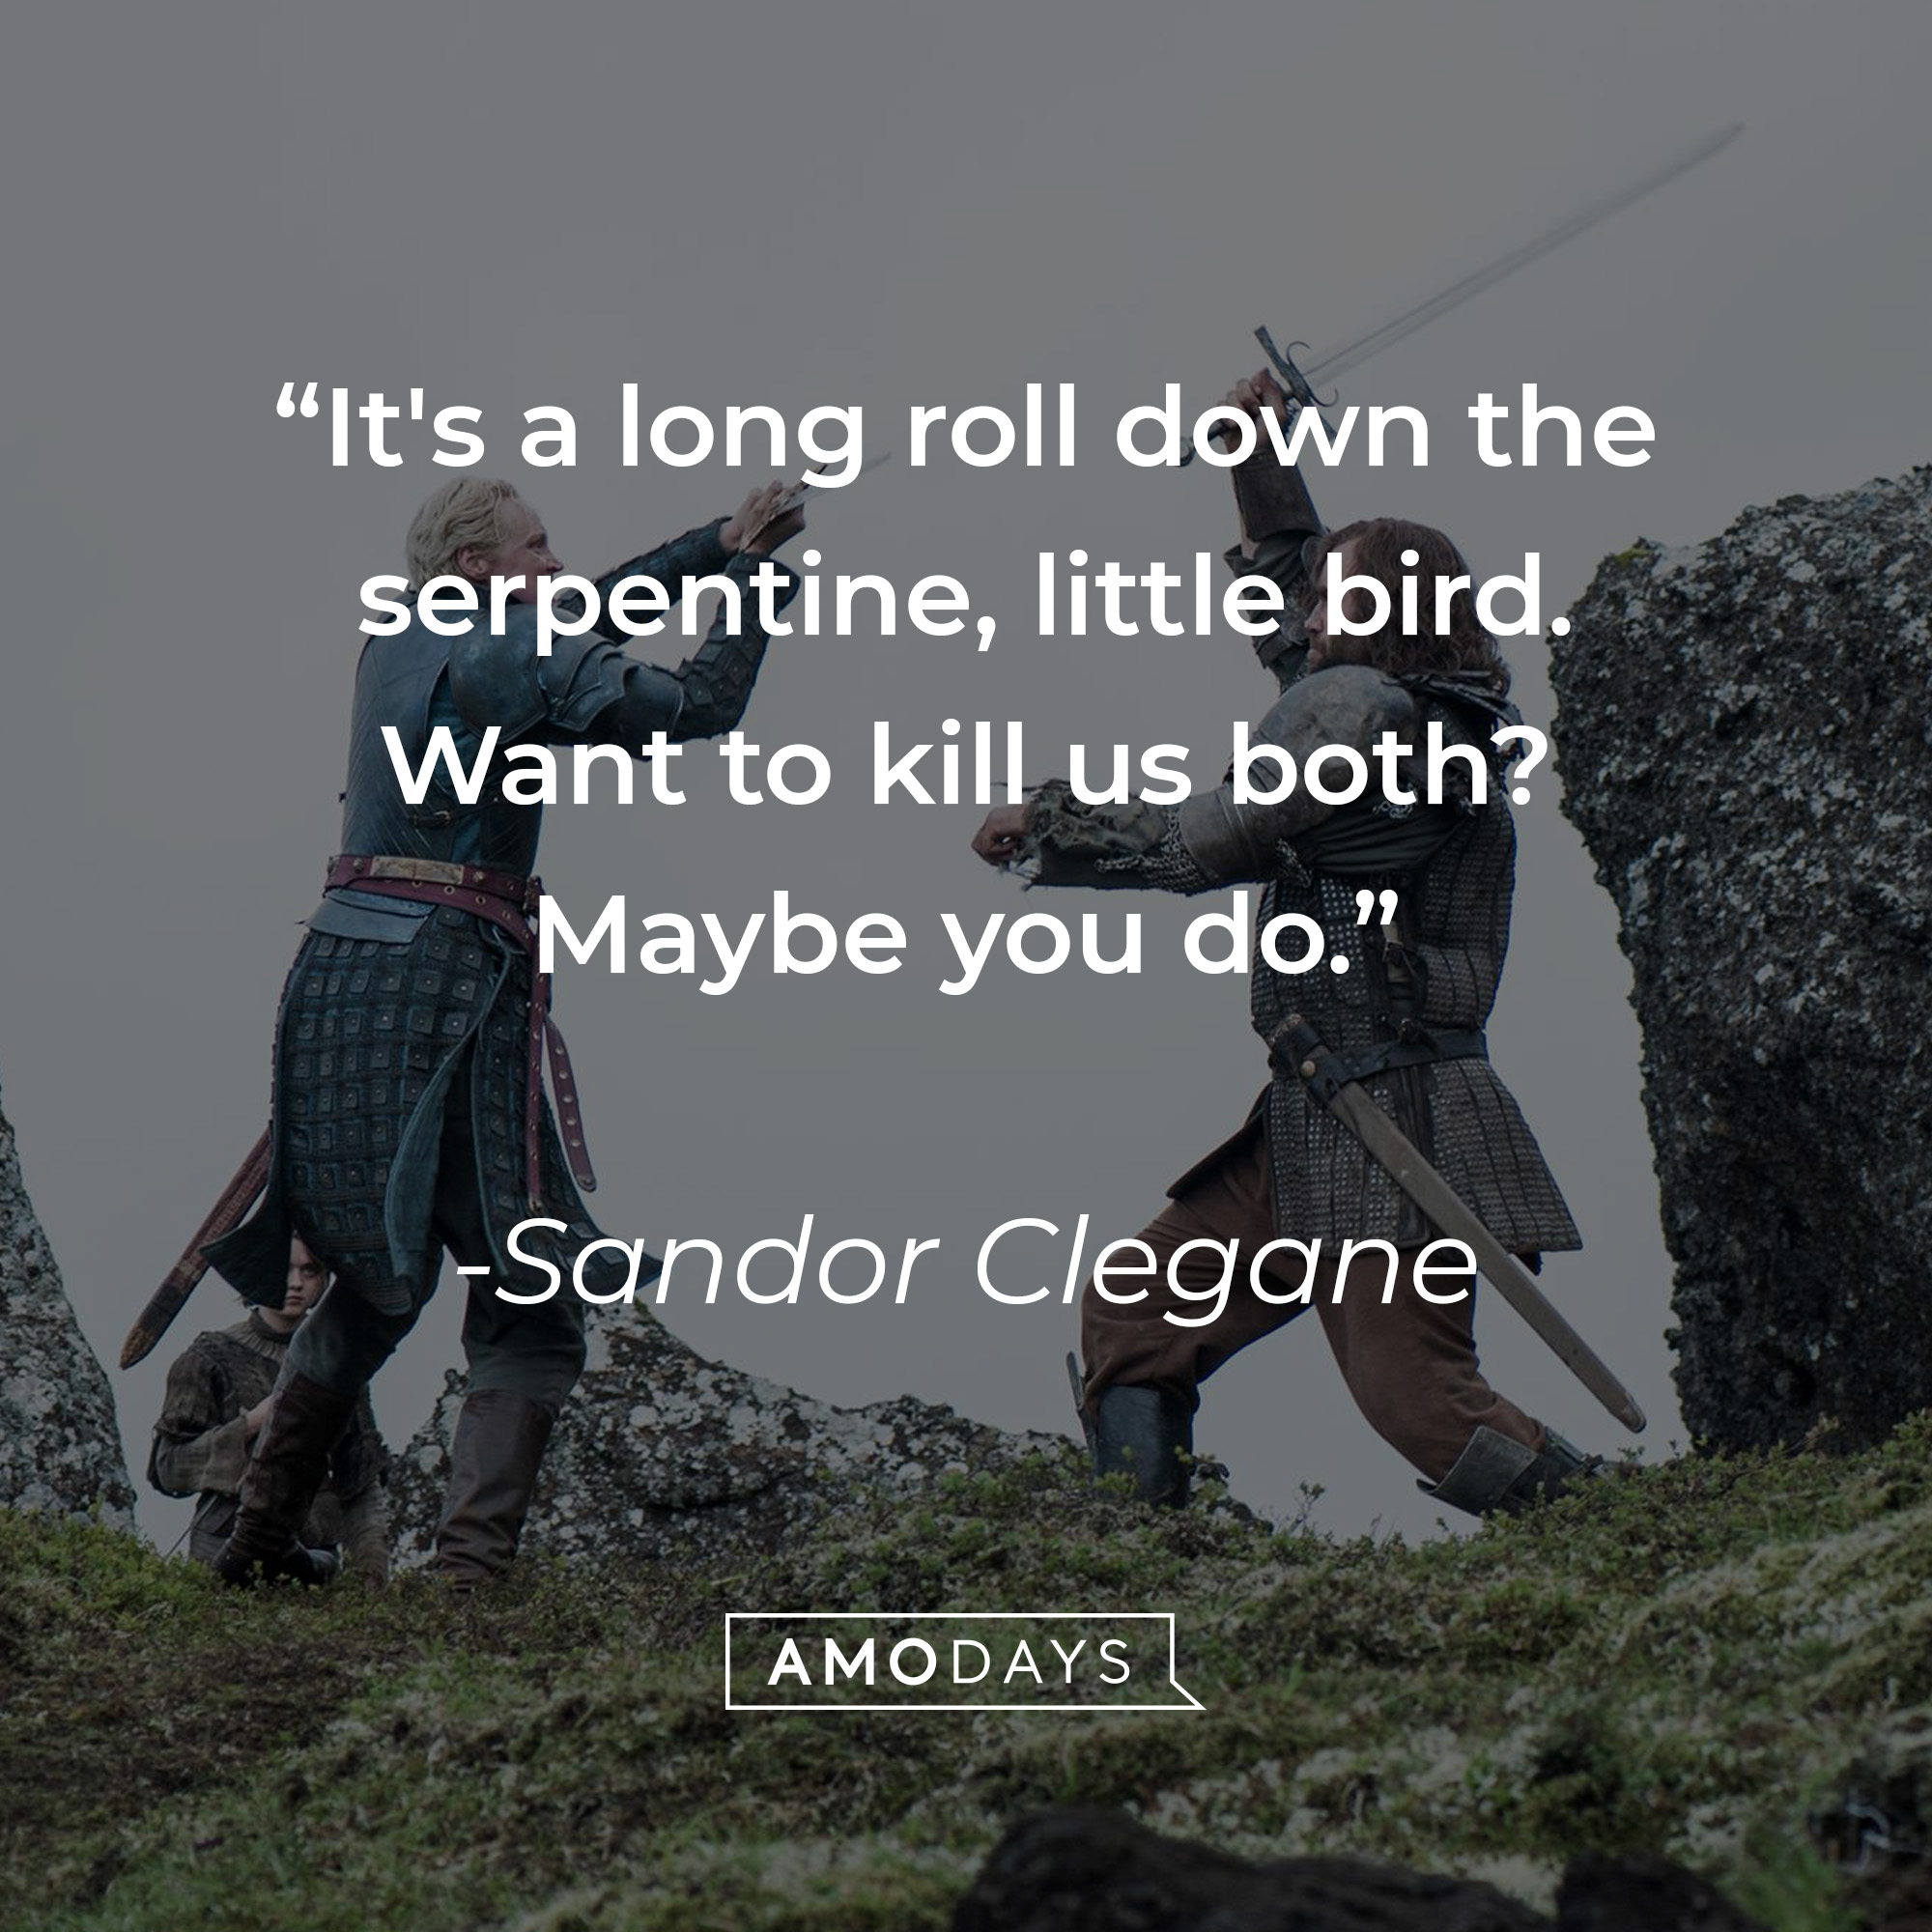 Sandor Clegane's quote: "It's a long roll down the serpentine, little bird. Want to kill us both? Maybe you do." | Source: facebook.com/GameOfThrones